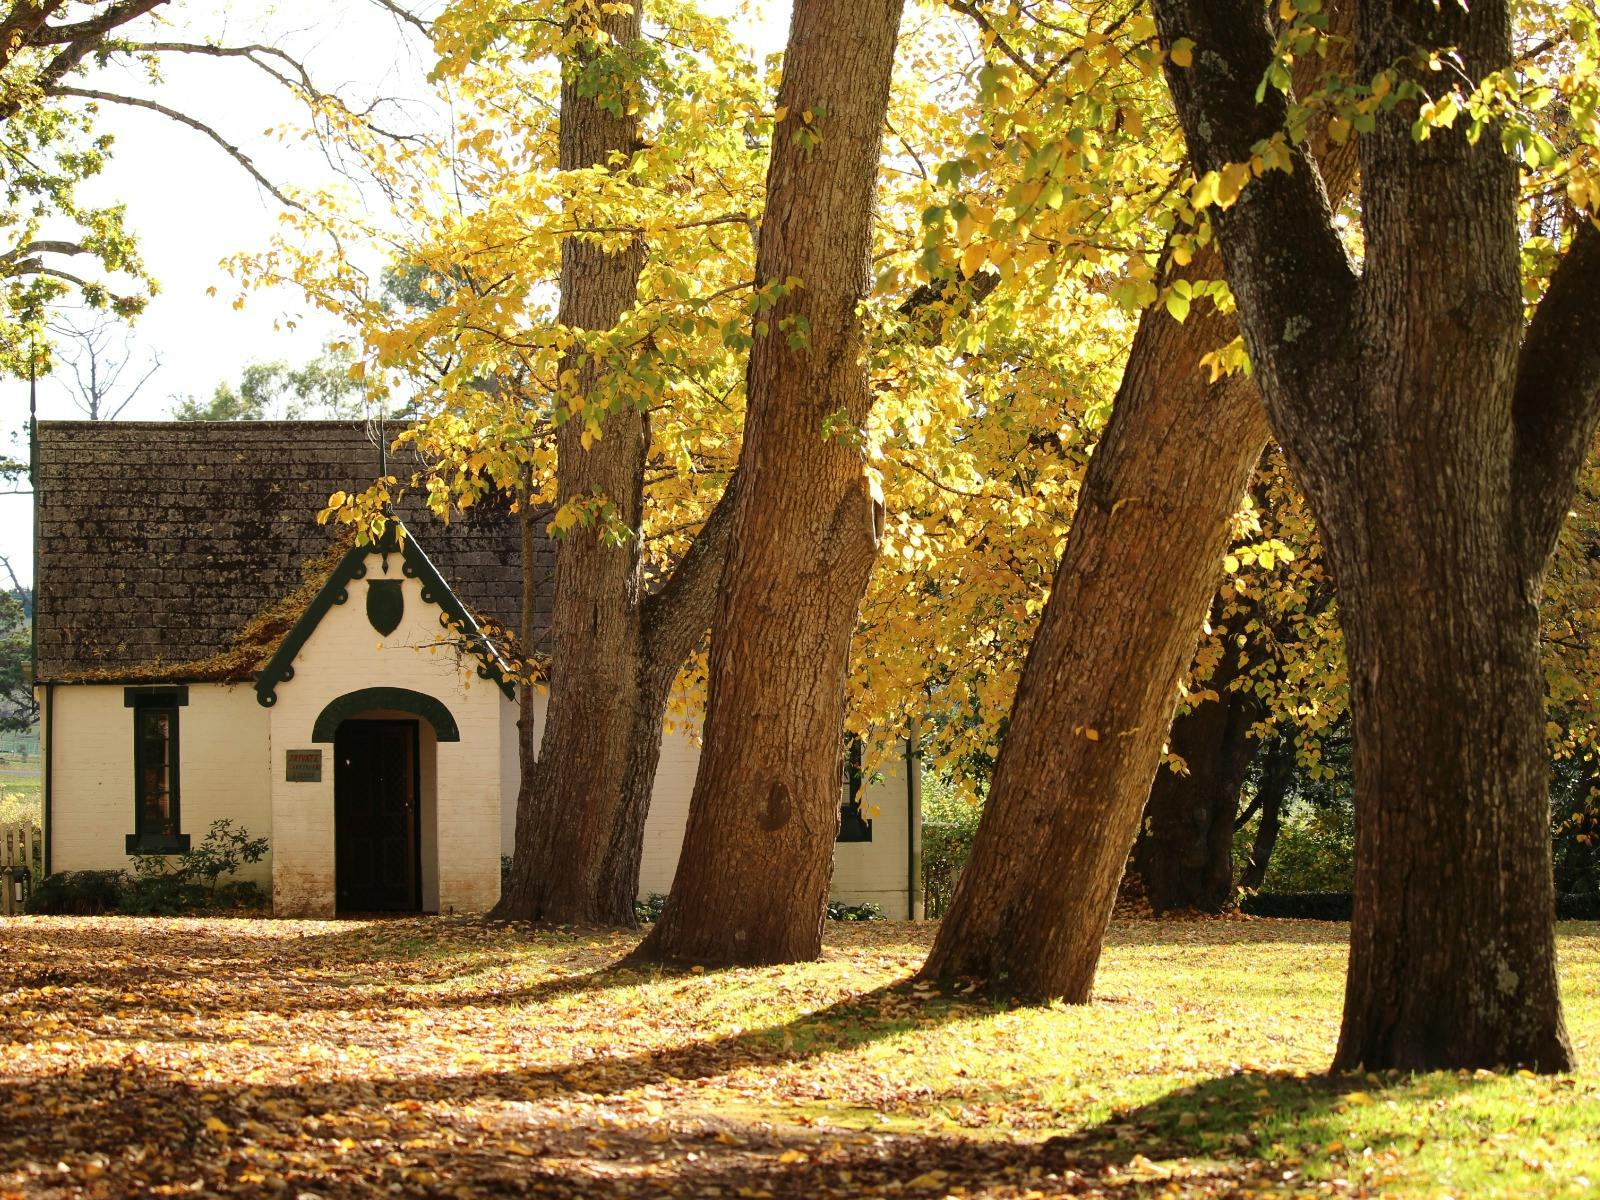 One storey white cottage at the end of a tree lined driveway in autumn colours